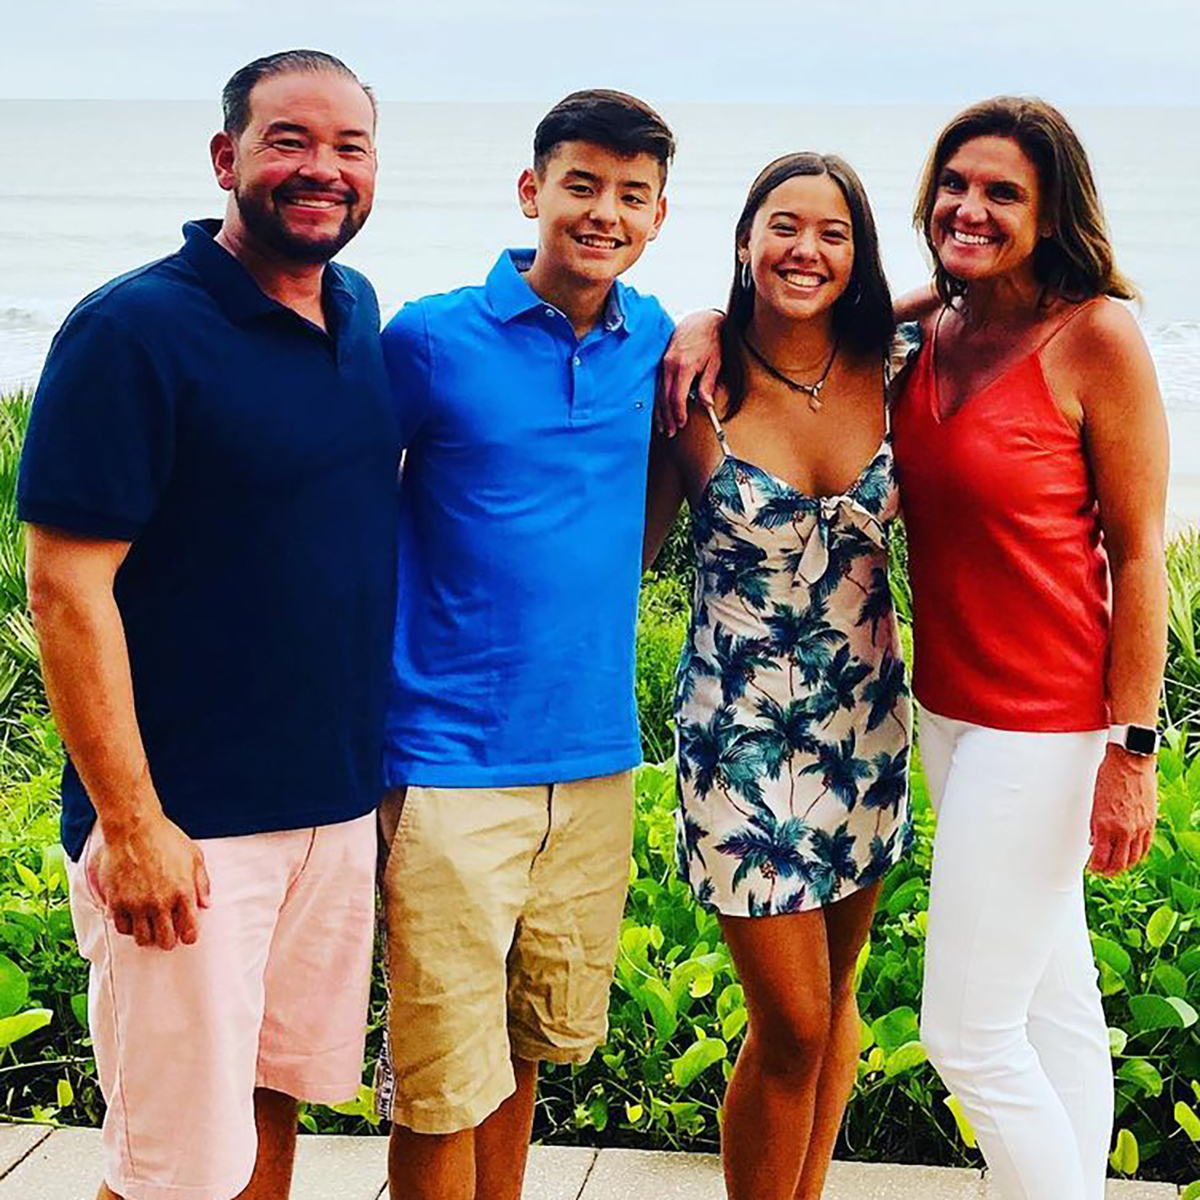 Jon Gosselin’s Ex Colleen Defends His Son Collin After Family’s Claims